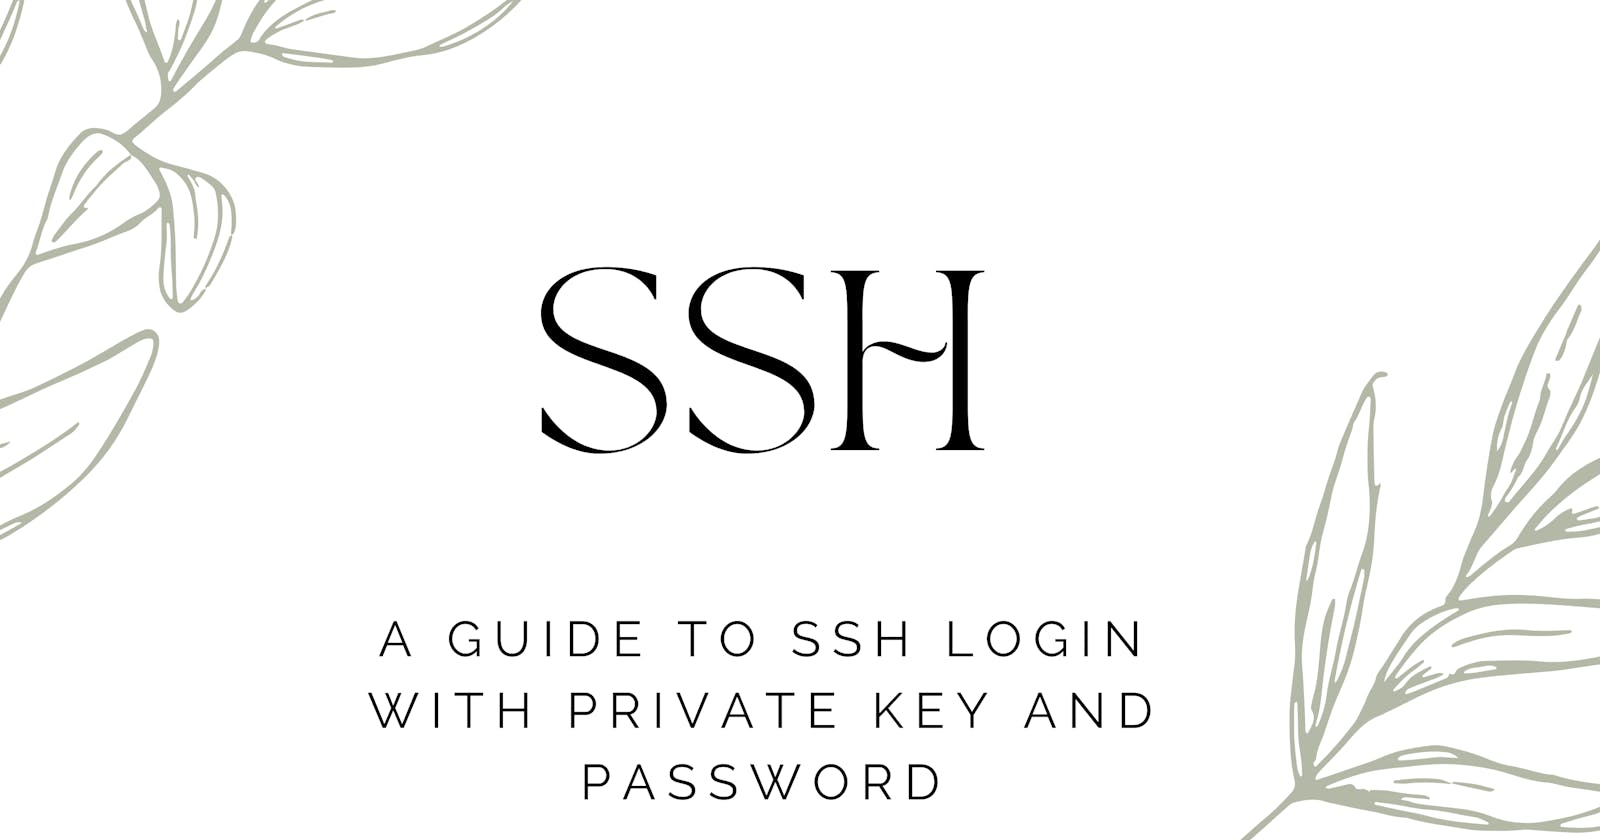 Securely Accessing Your Server: A Guide to SSH Login with Private Key and Password